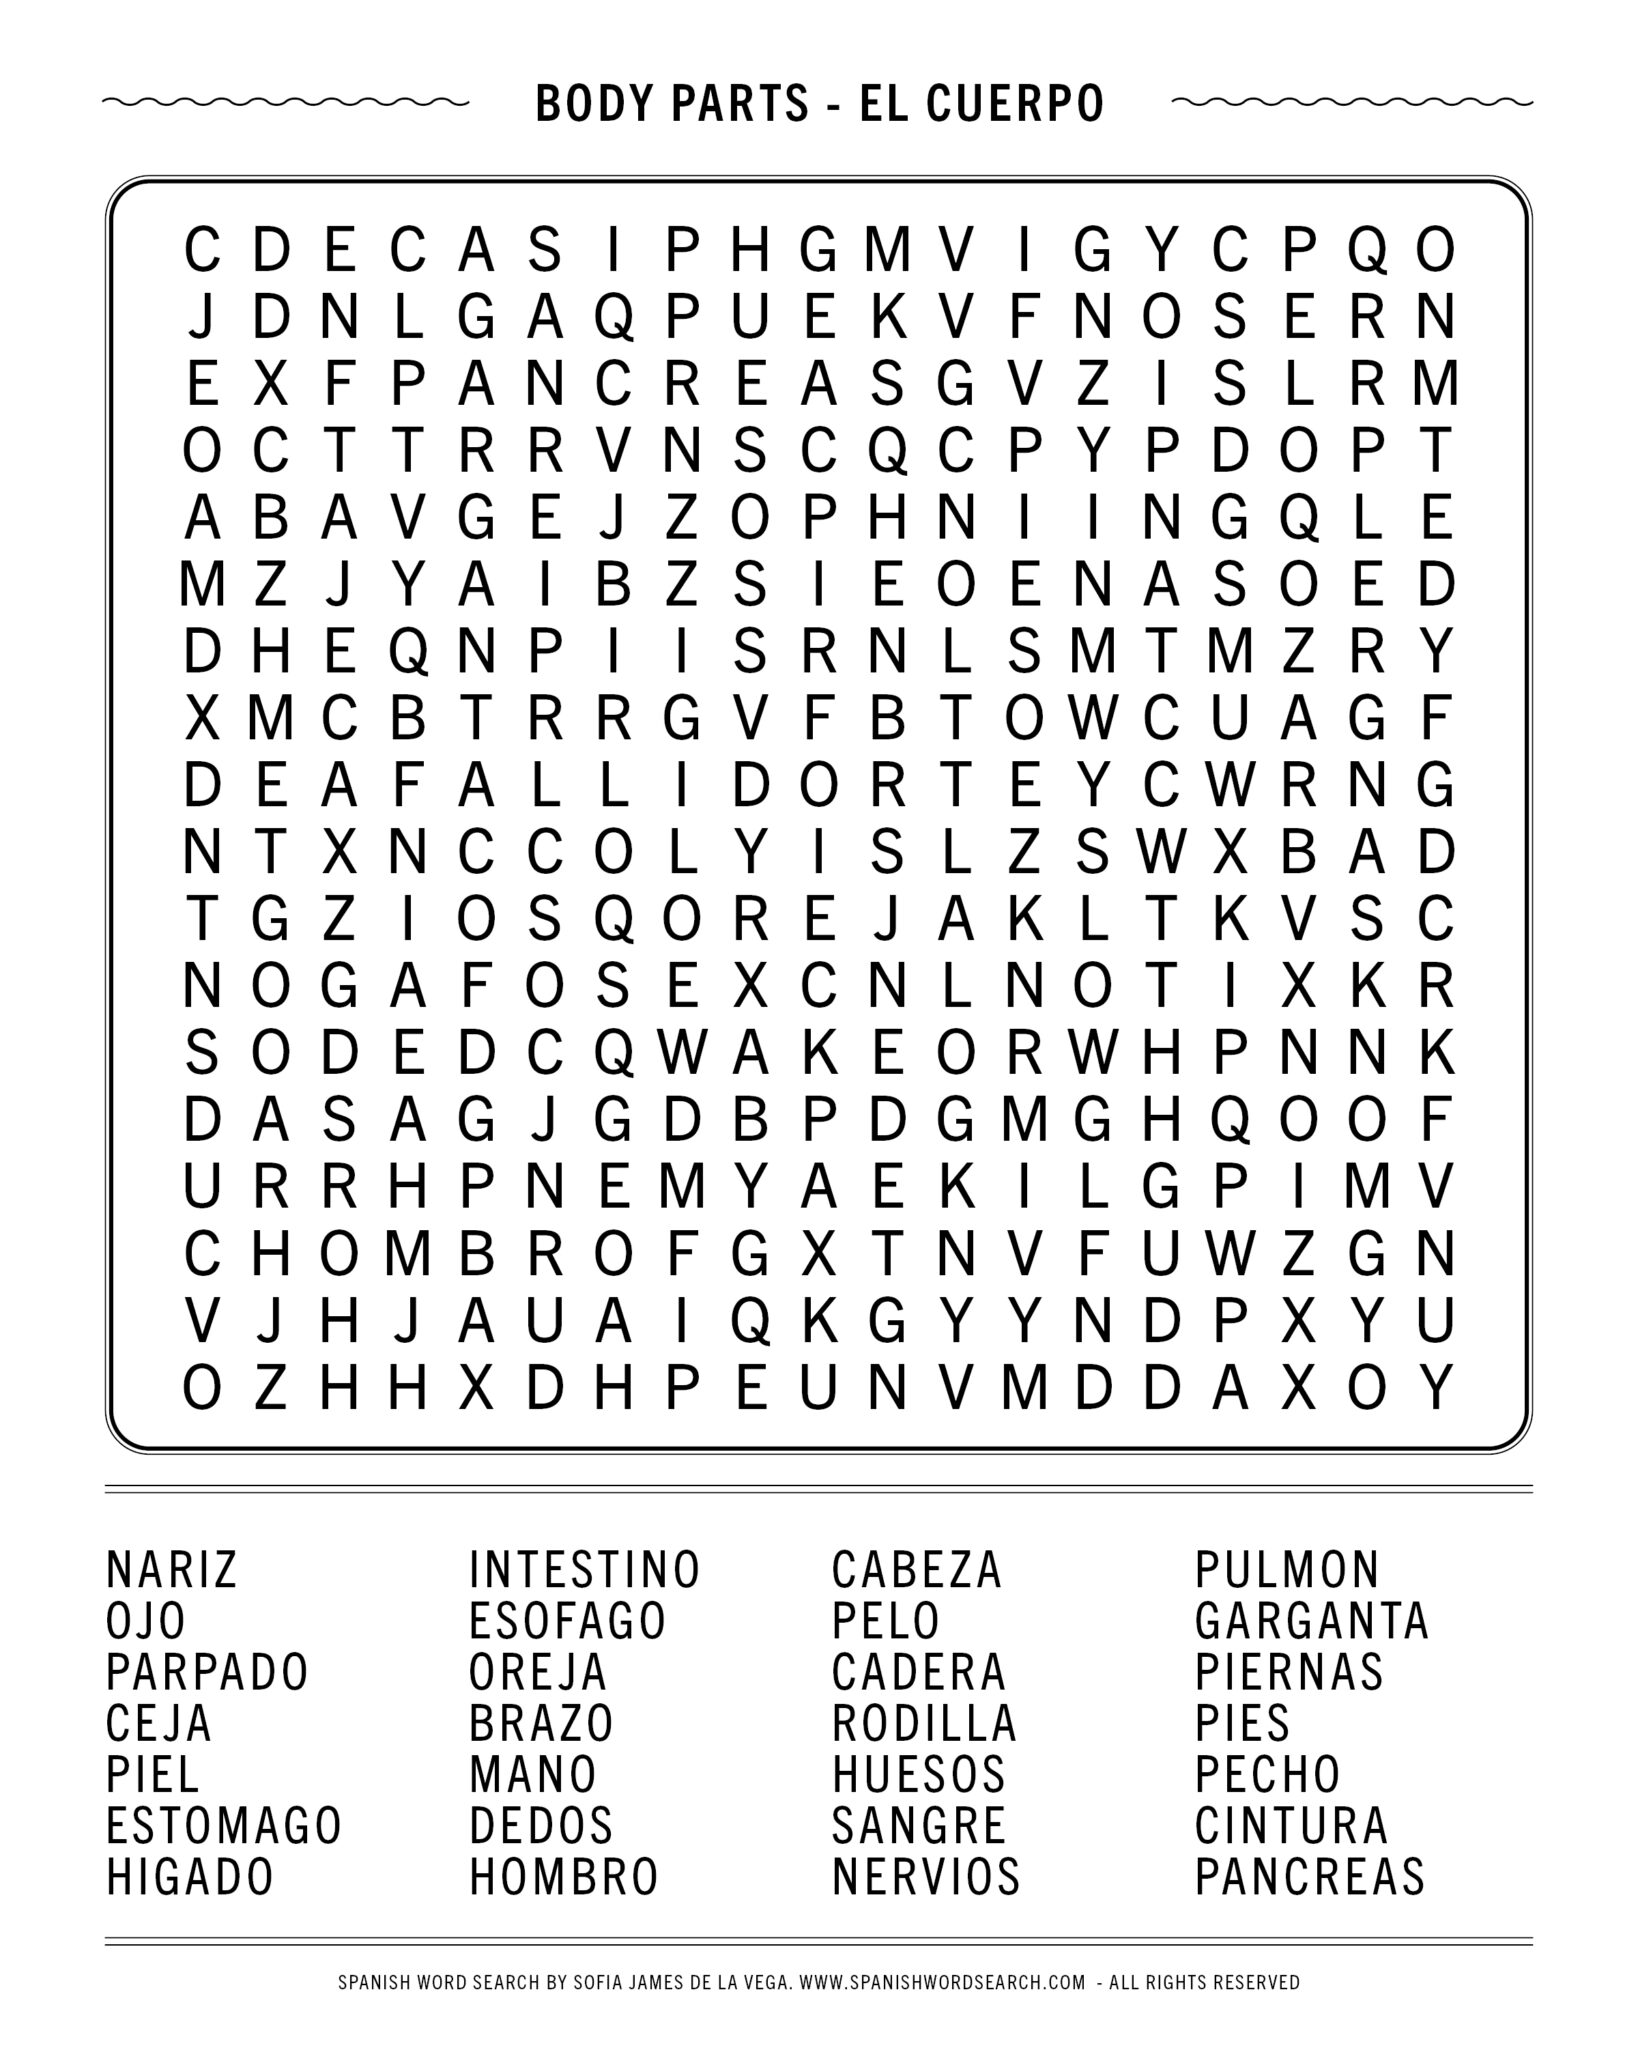 Spanish Word Search Body Parts Can you find all the body parts?